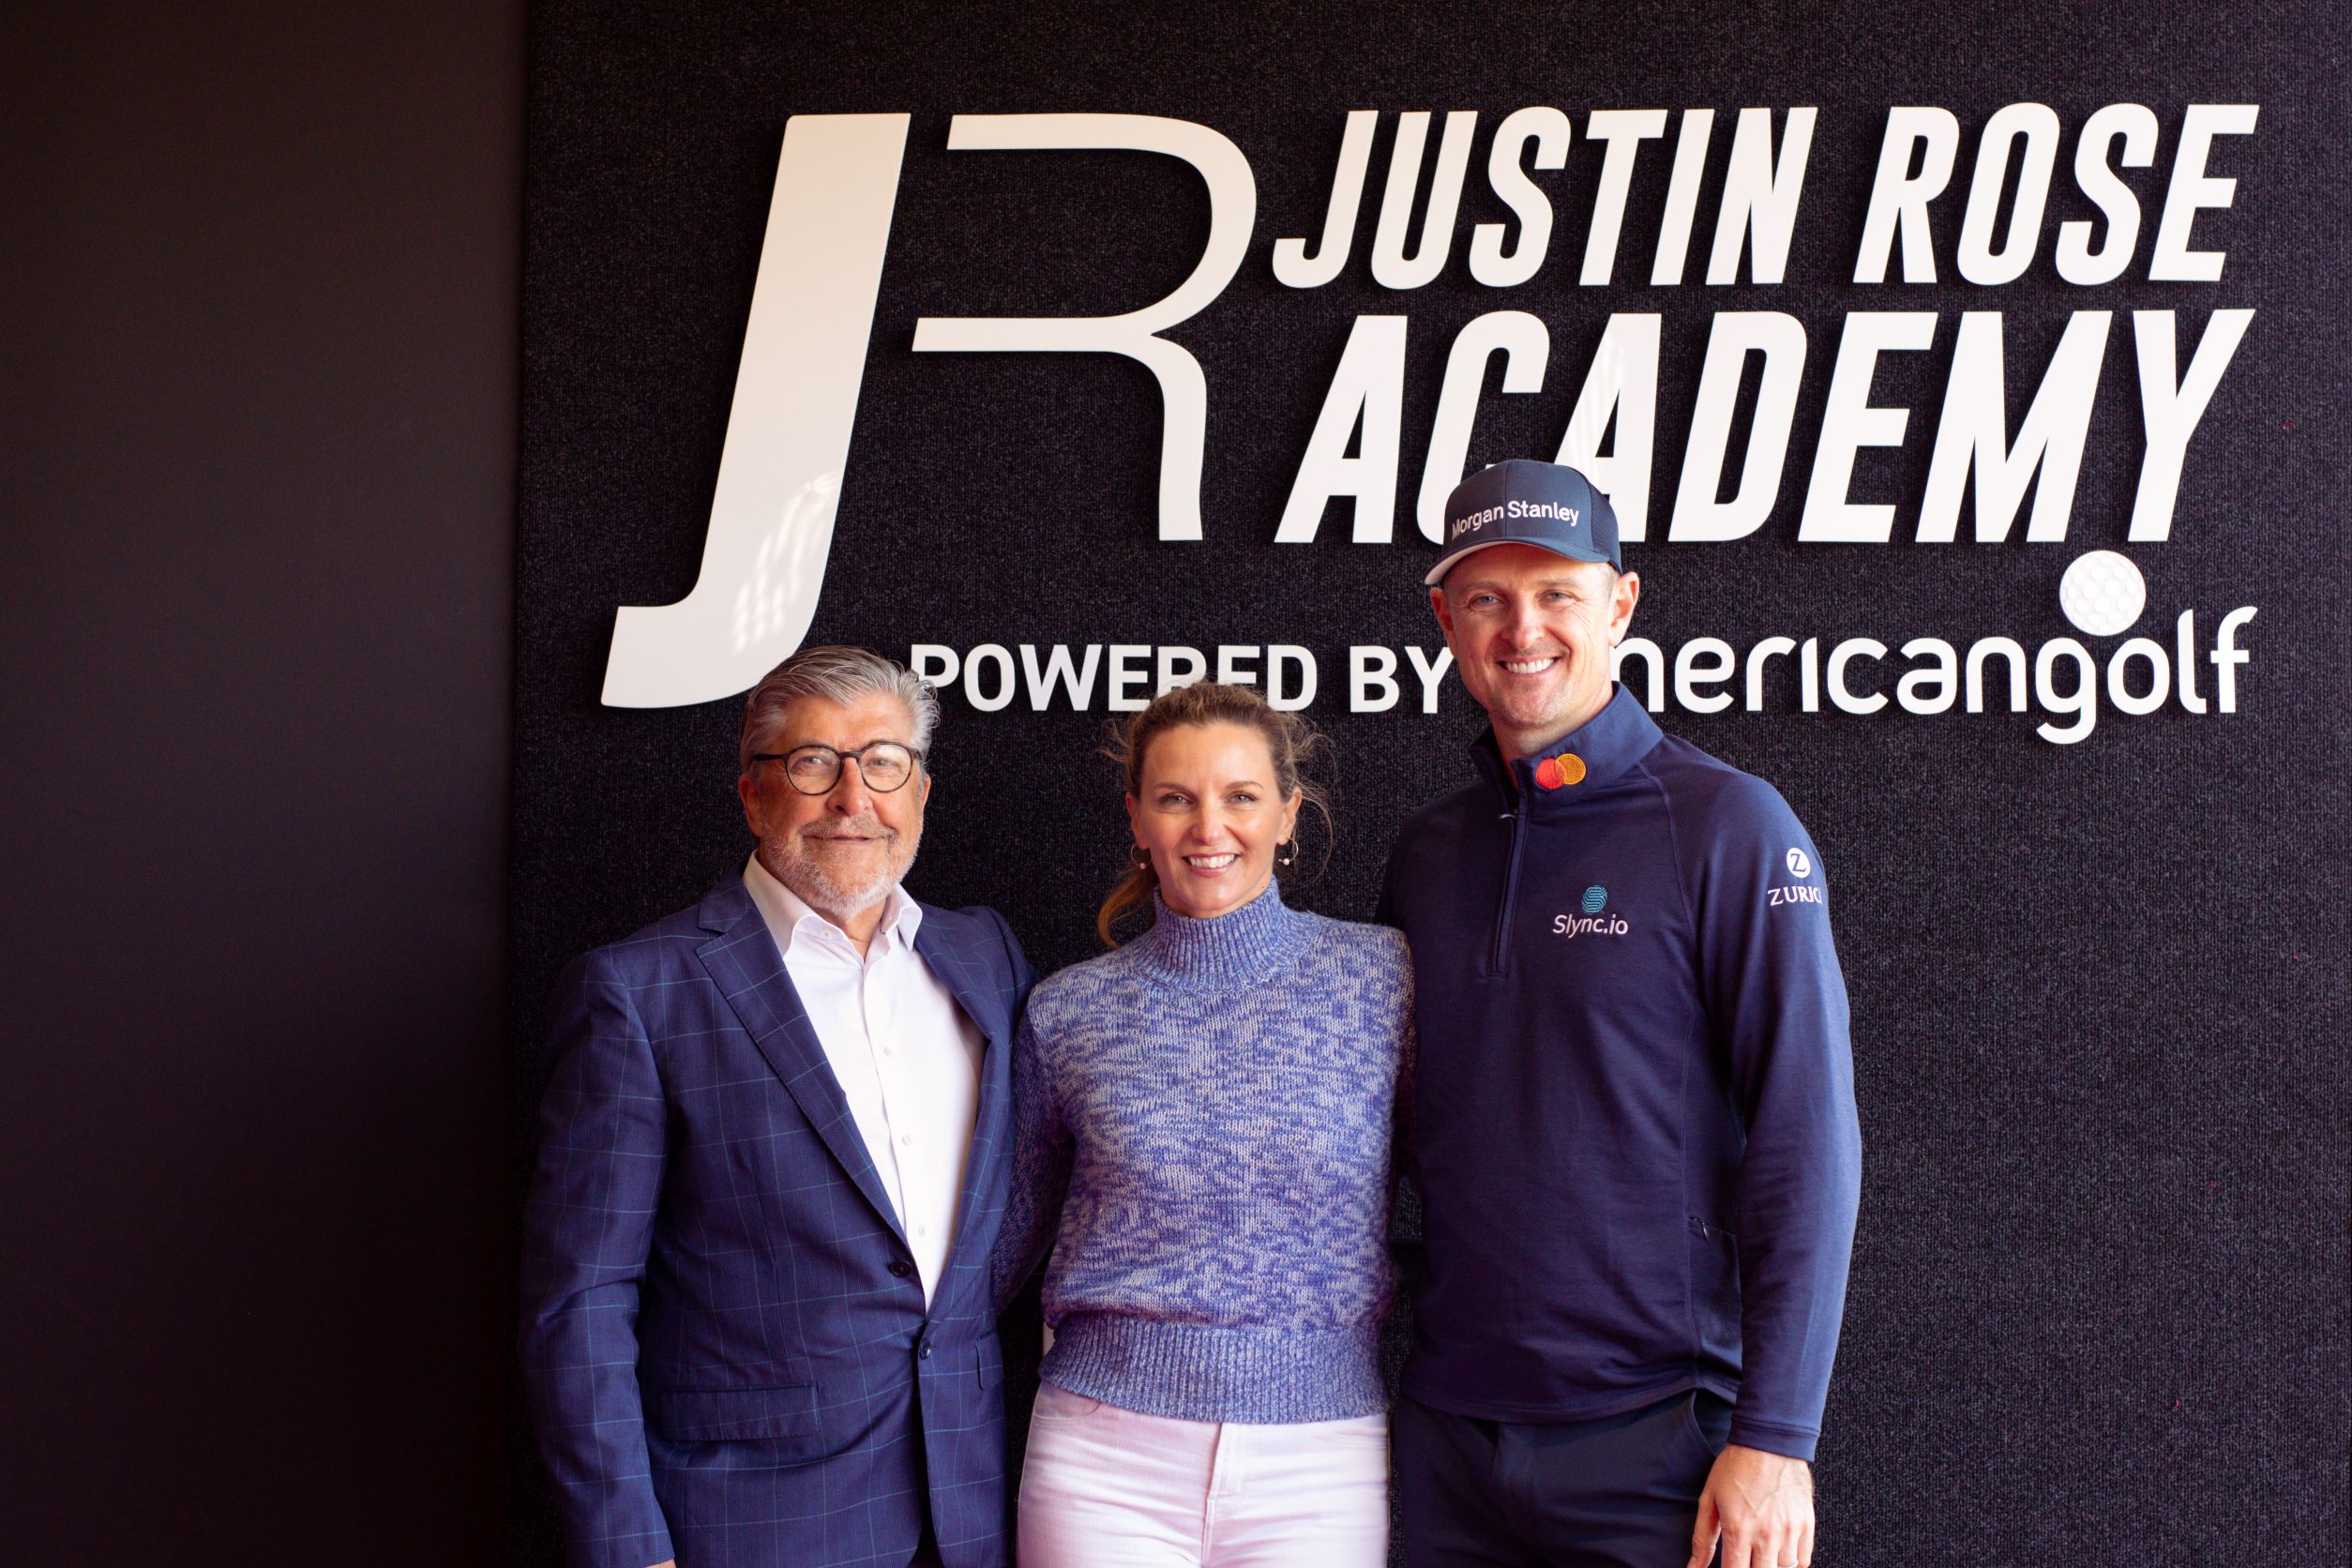 American Golf CEO Gary Favell with Kate and Justin Rose at The Justin-Rose-Academy-Launch